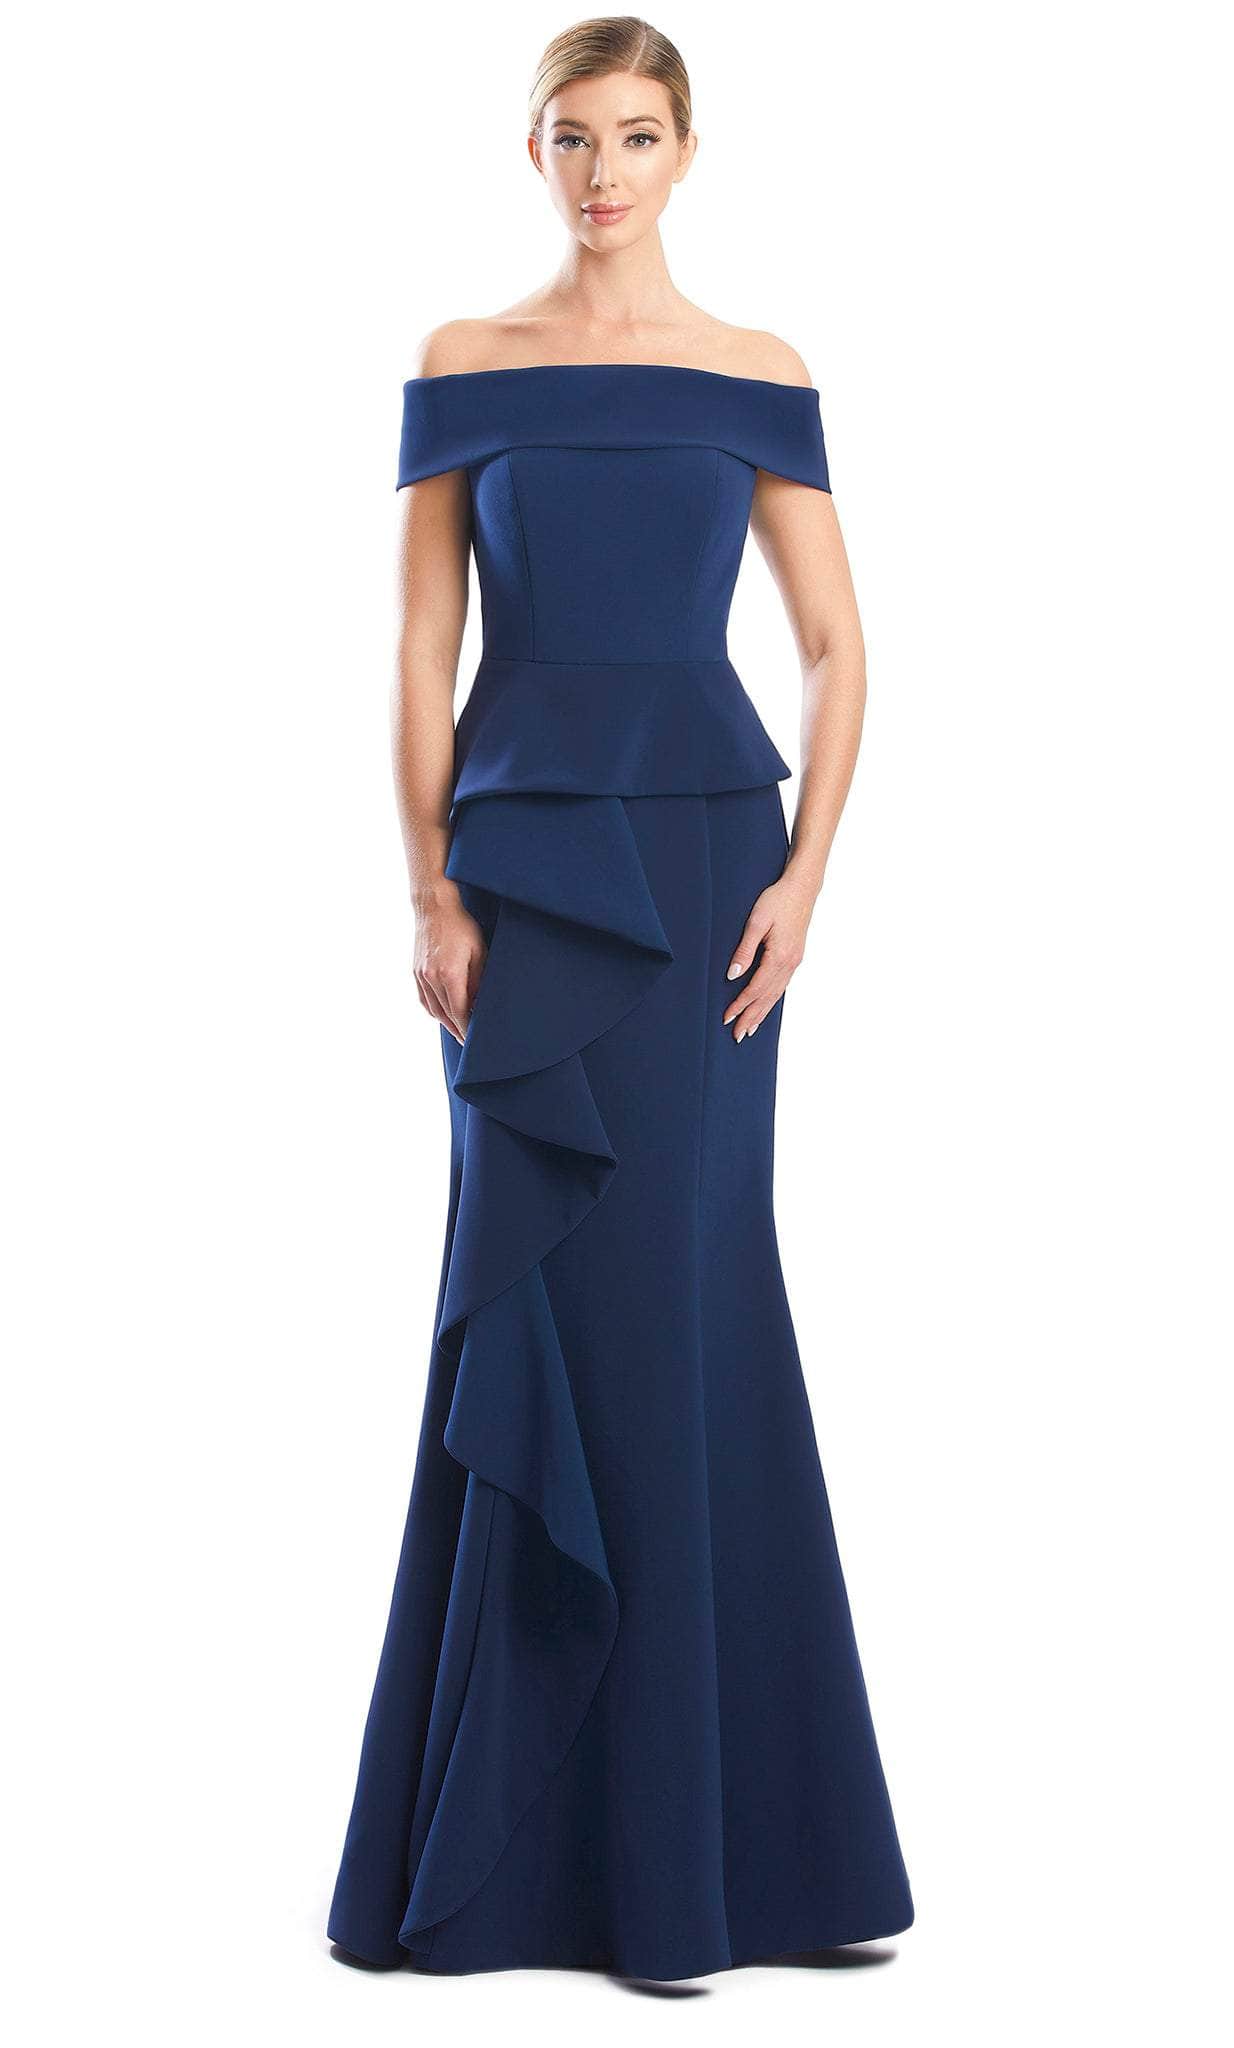 Alexander by Daymor 1756S23 - Minimalistic Off Shoulder Gown Evening Dresses 00 / Navy